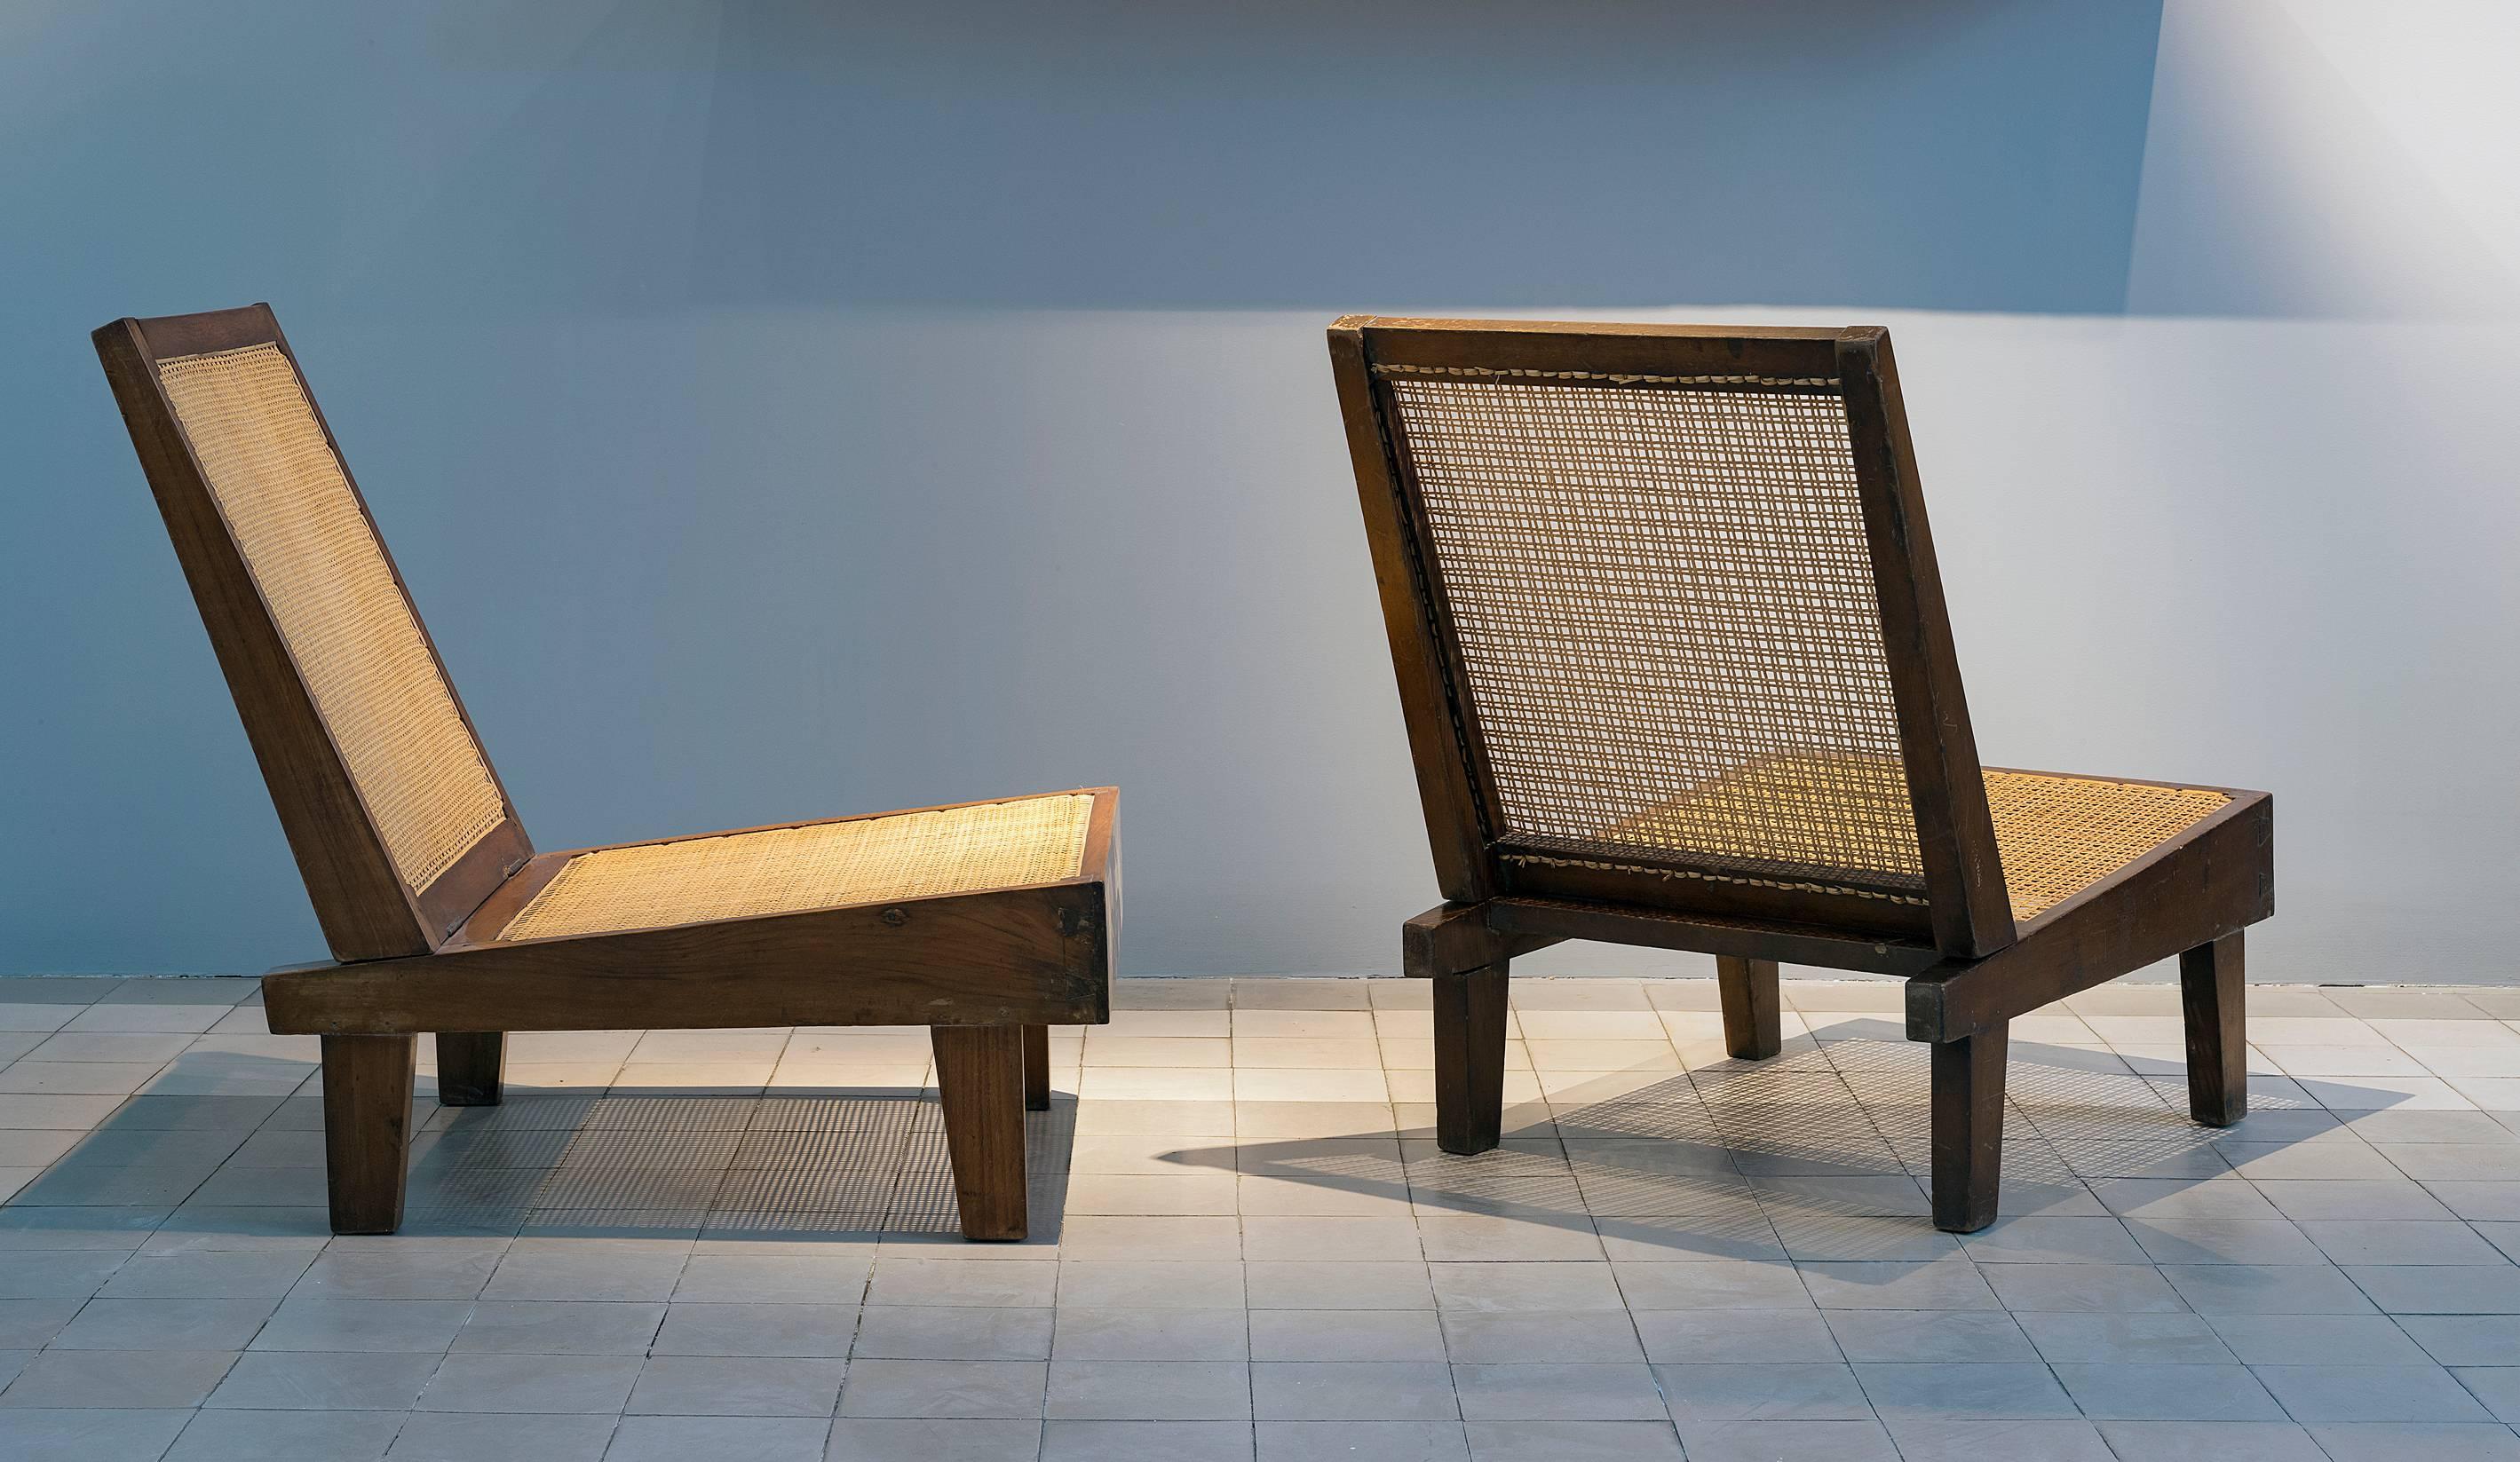 Pierre Jeanneret
PJ-SI-61-A
Folding armless easy chair, circa 1960
Folding back on hinges.
Solid teak, cane.
Private residences.
 